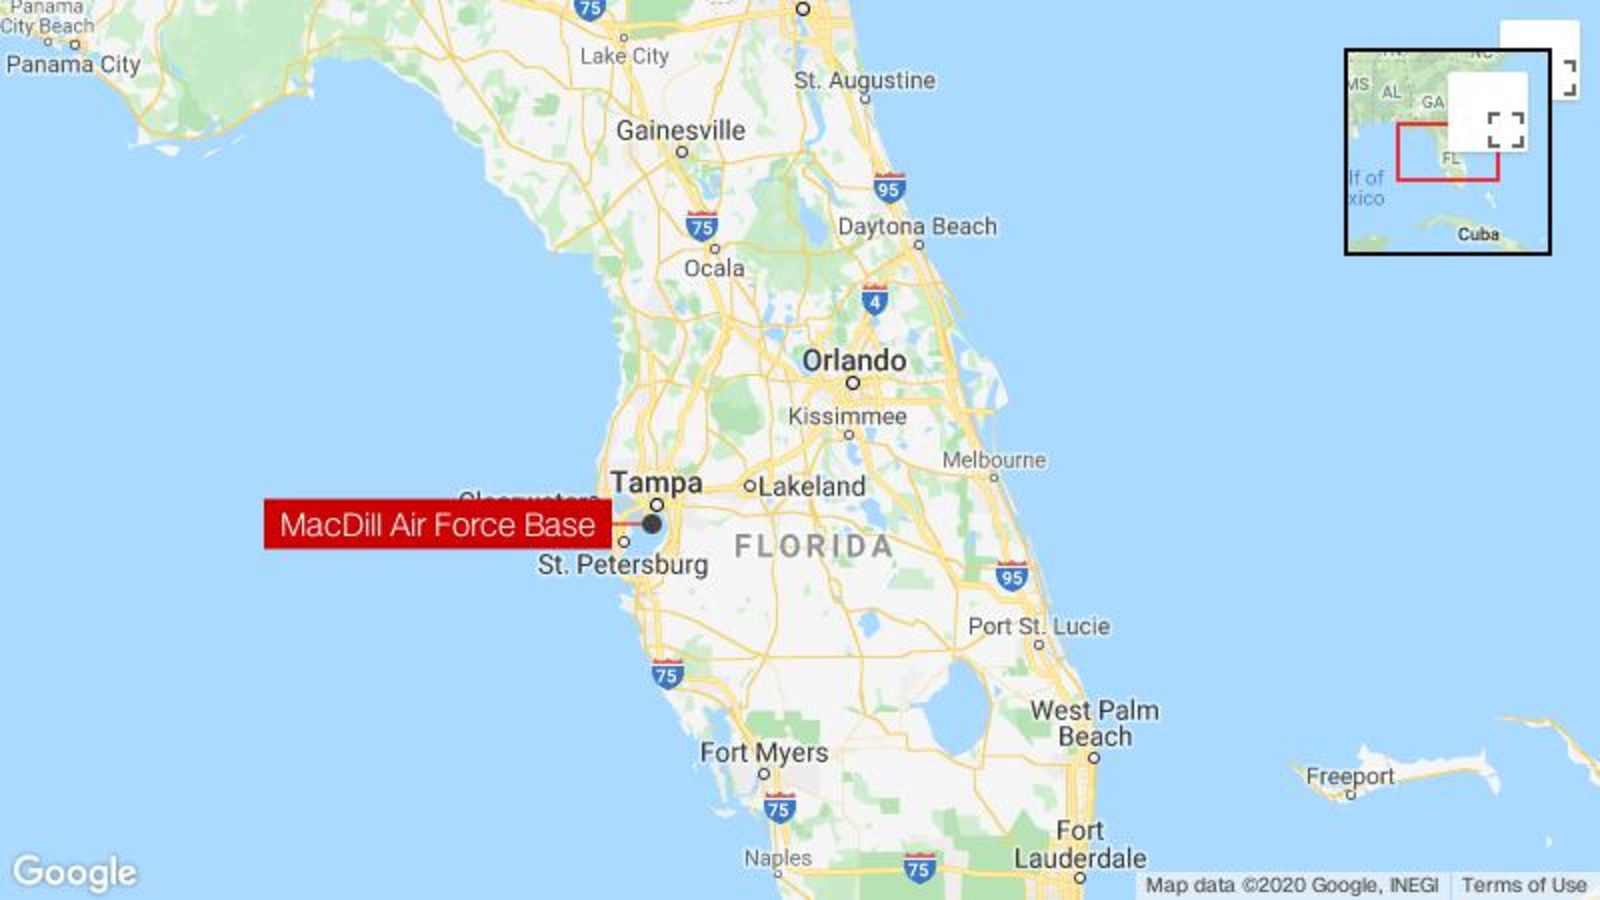 MacDill Air Force Base in Florida was briefly under lockdown over